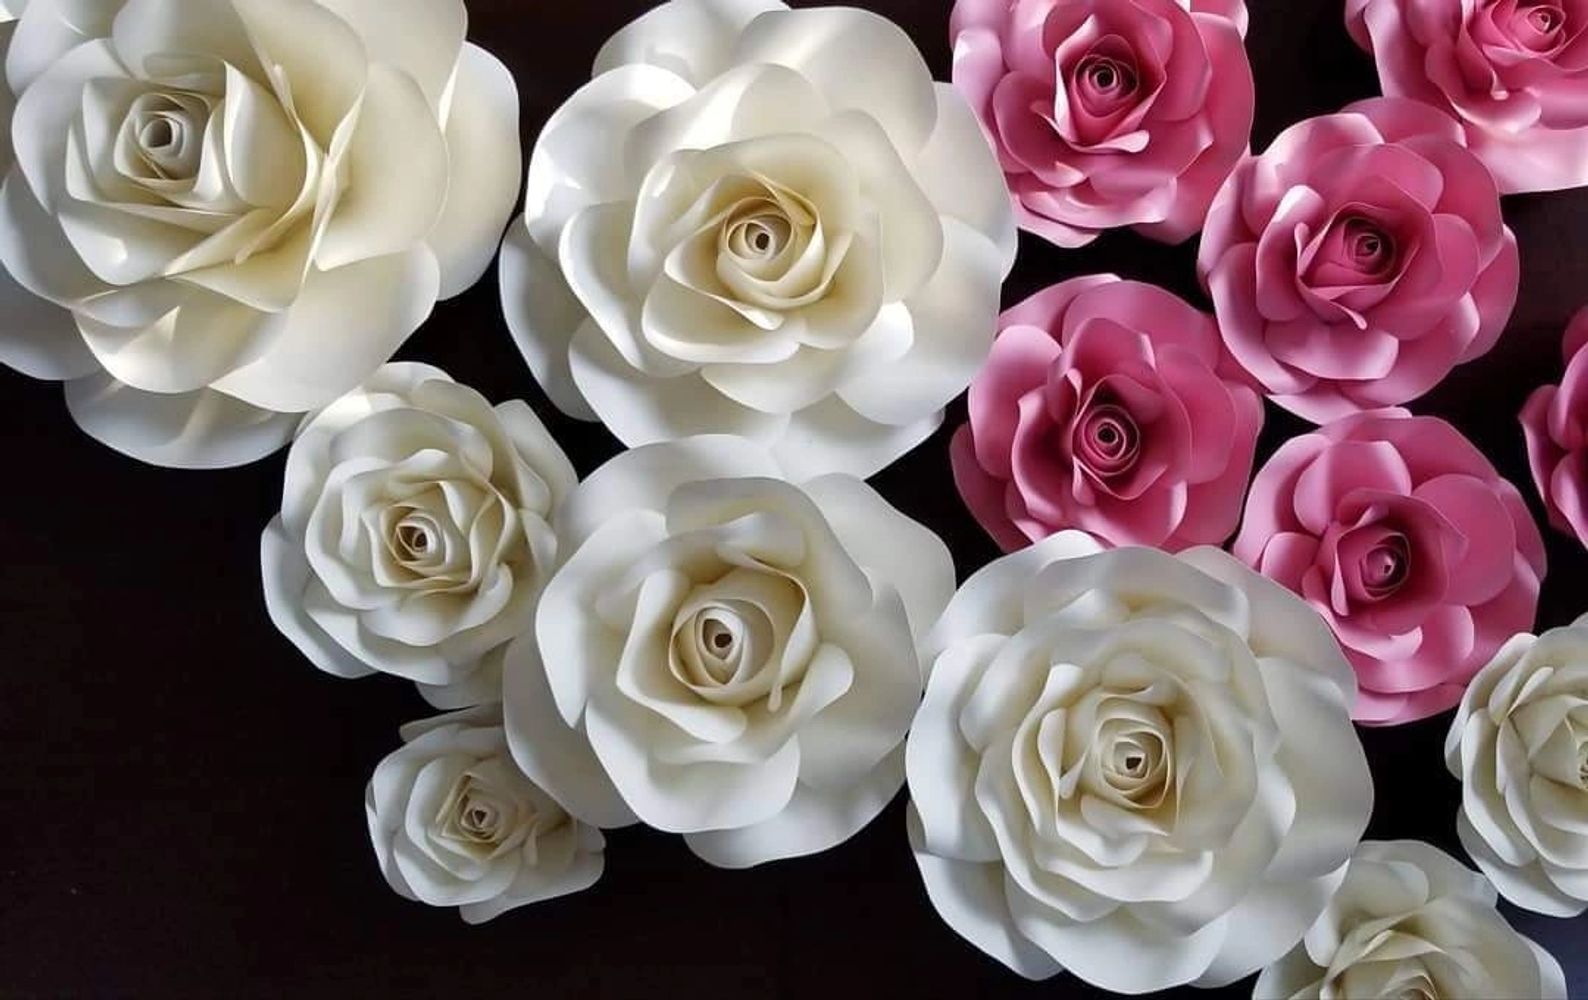 paper flowers, paper roses, large flowers, handmade items, flower walls, event decor, wall rental